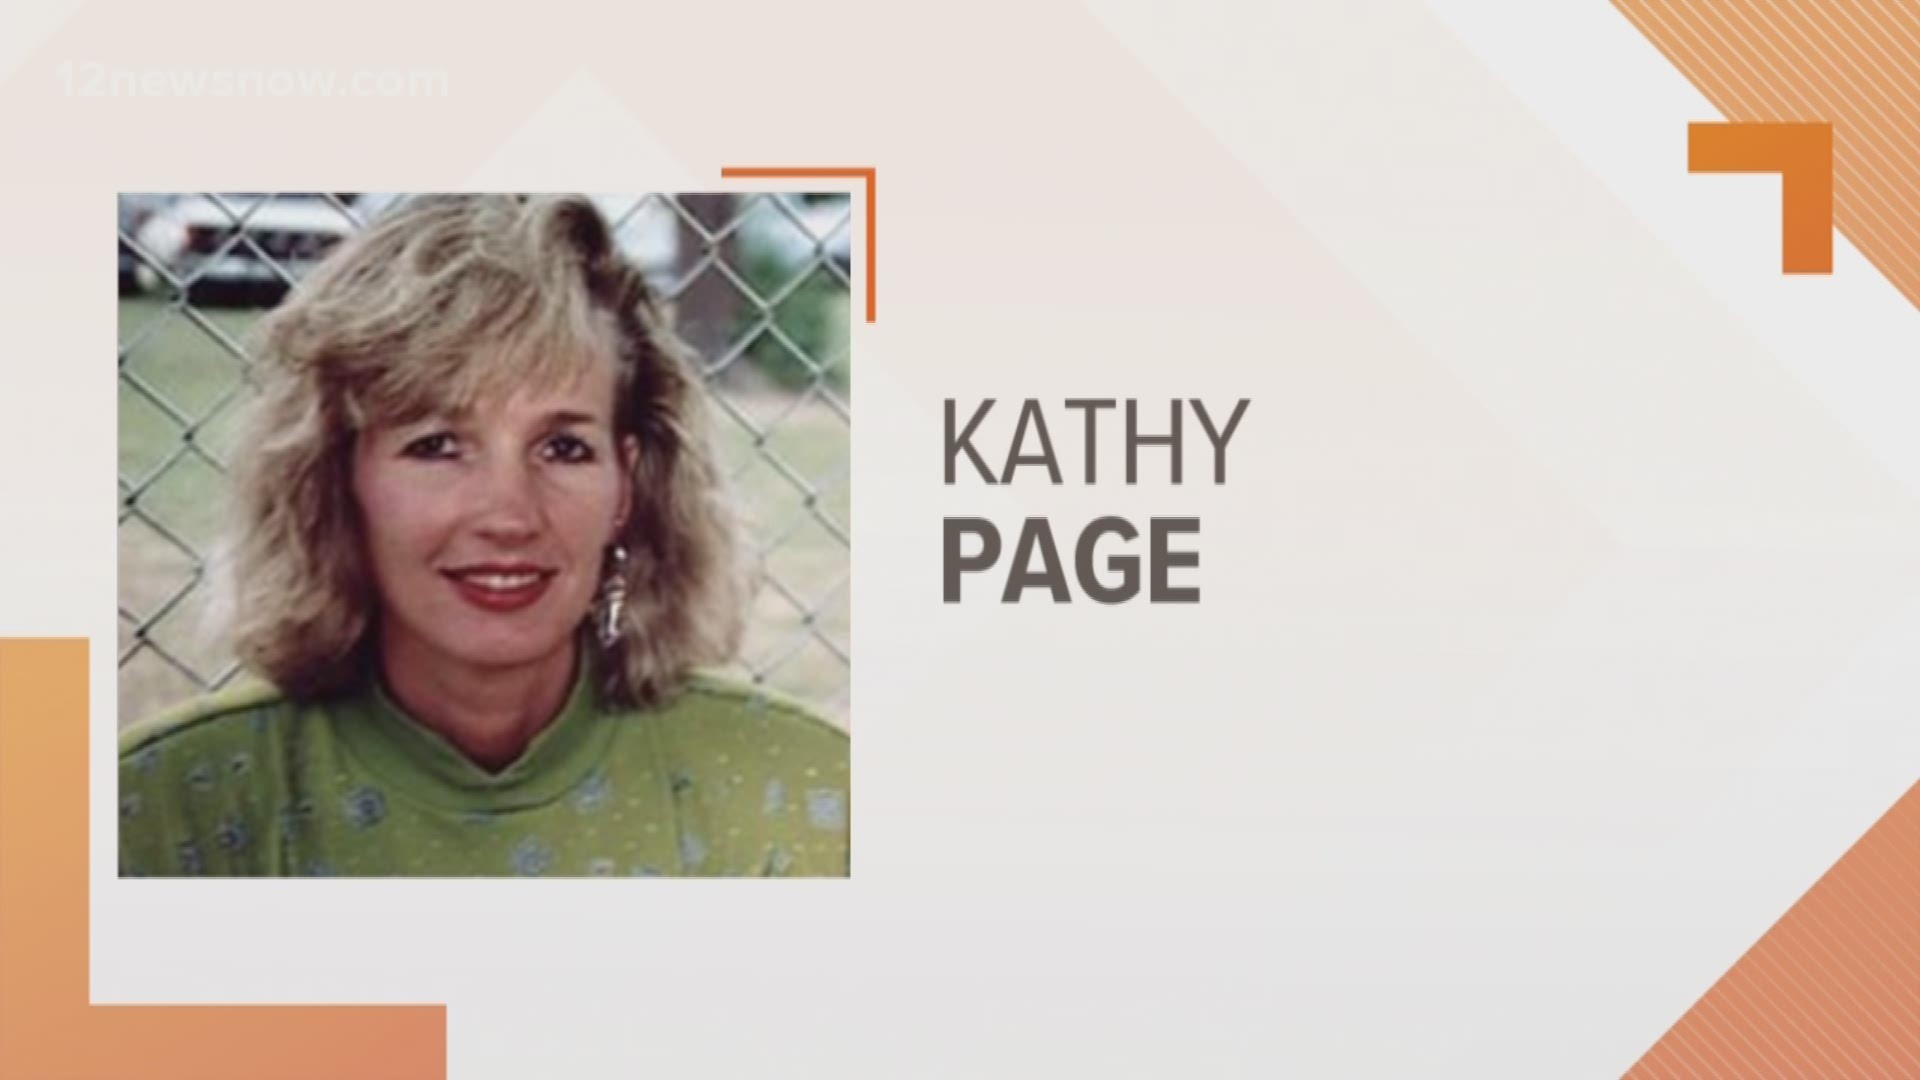 Texas Rangers double reward for info on 1991 murder of Kathy Page